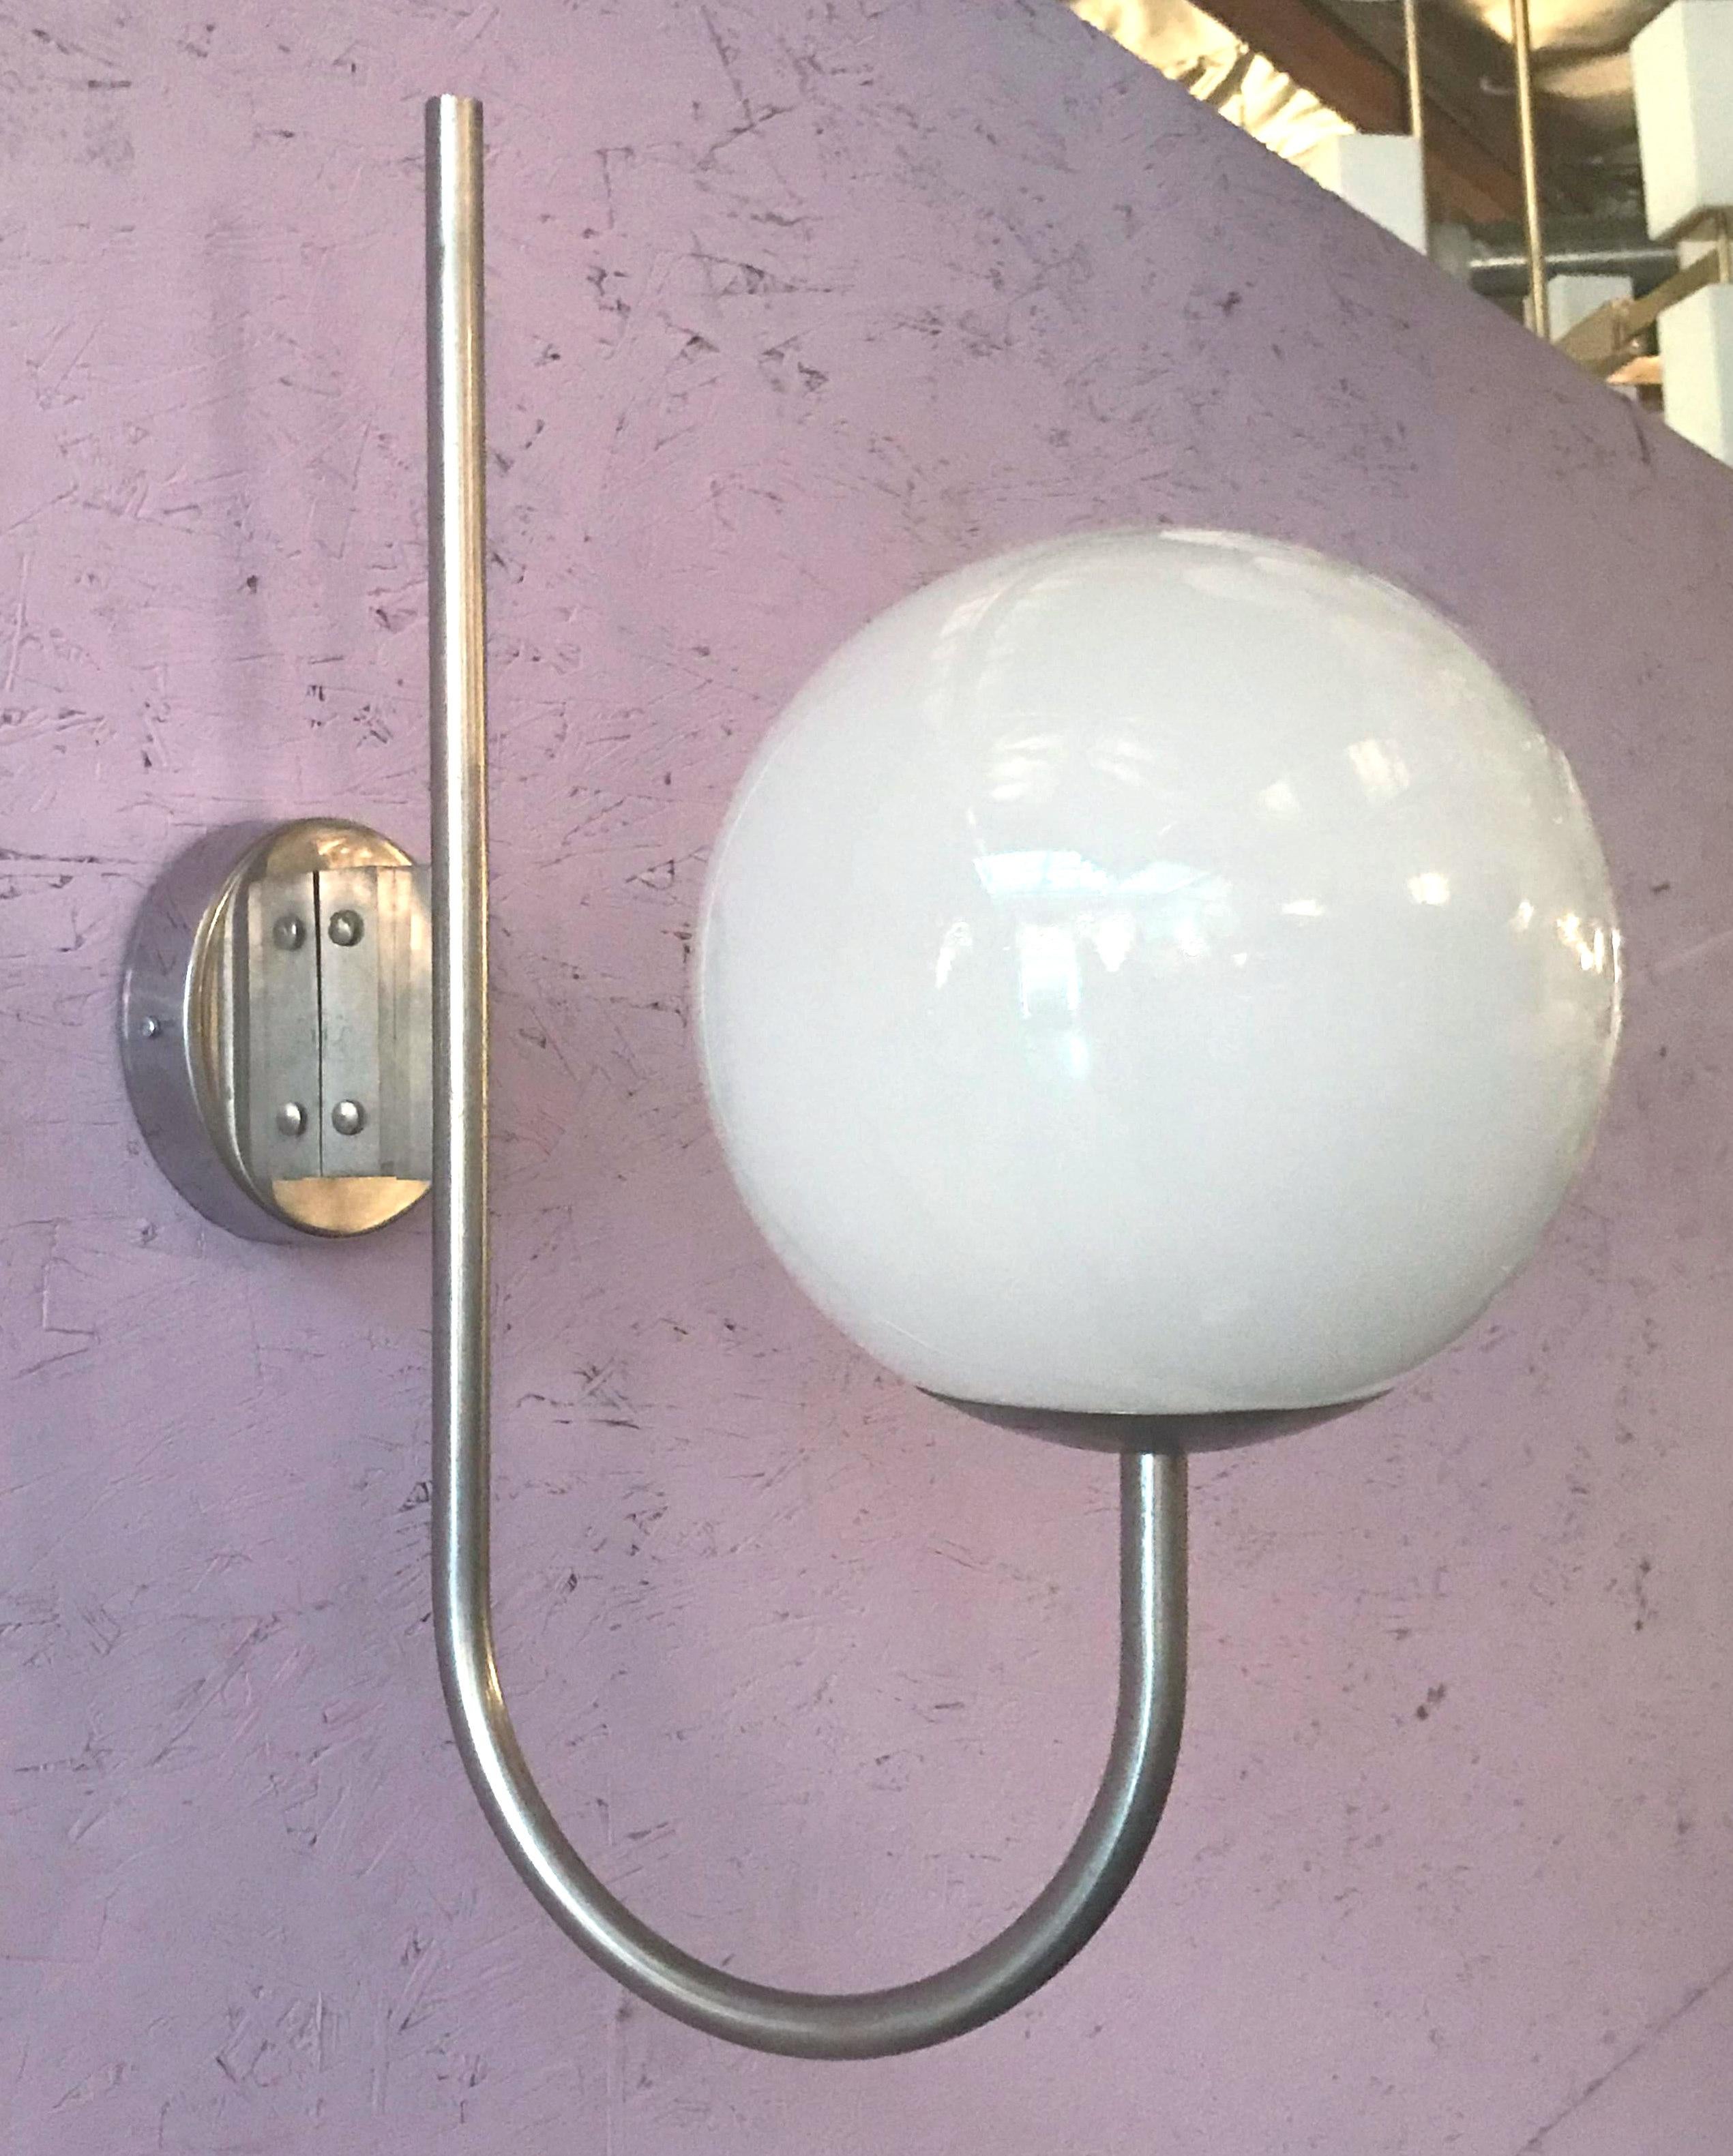 Vintage Italian wall light with glossy white Murano glass globe mounted on nickel metal frame / Designed by Sergio Mazza, circa 1960’s / Made in Italy
1 light / E26 or E27 type / max 40W each
Height: 24 inches / Width: 9 inches / Depth: 17 inches
1